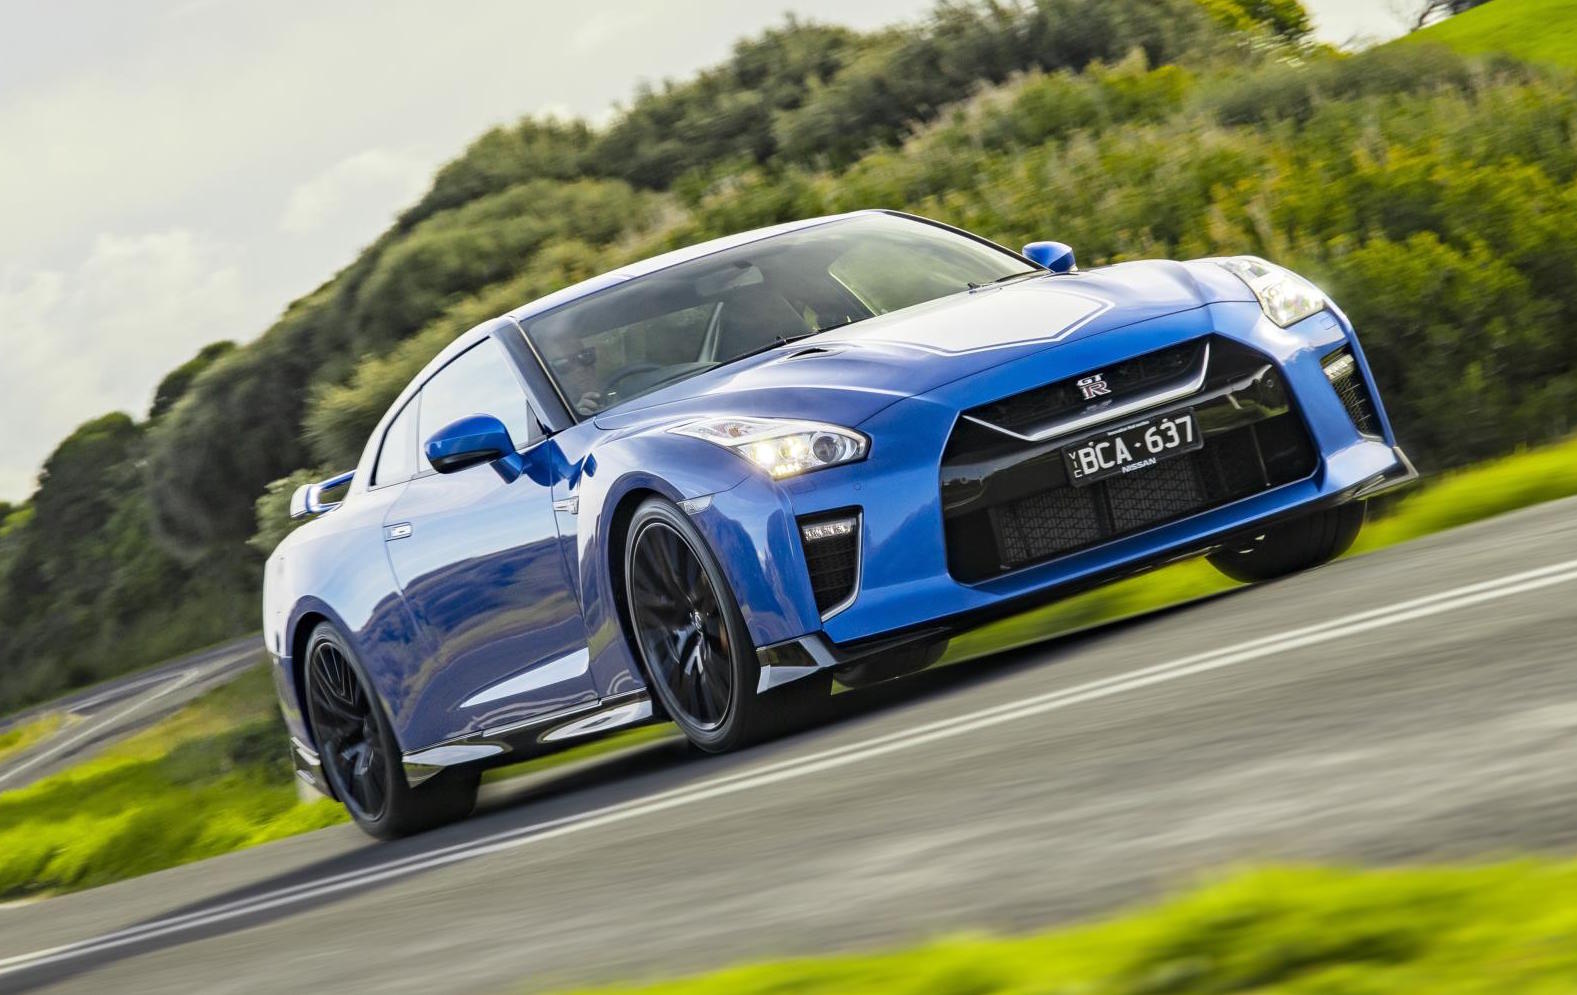 2020 Nissan Gt R Now On Sale In Australia With 50th